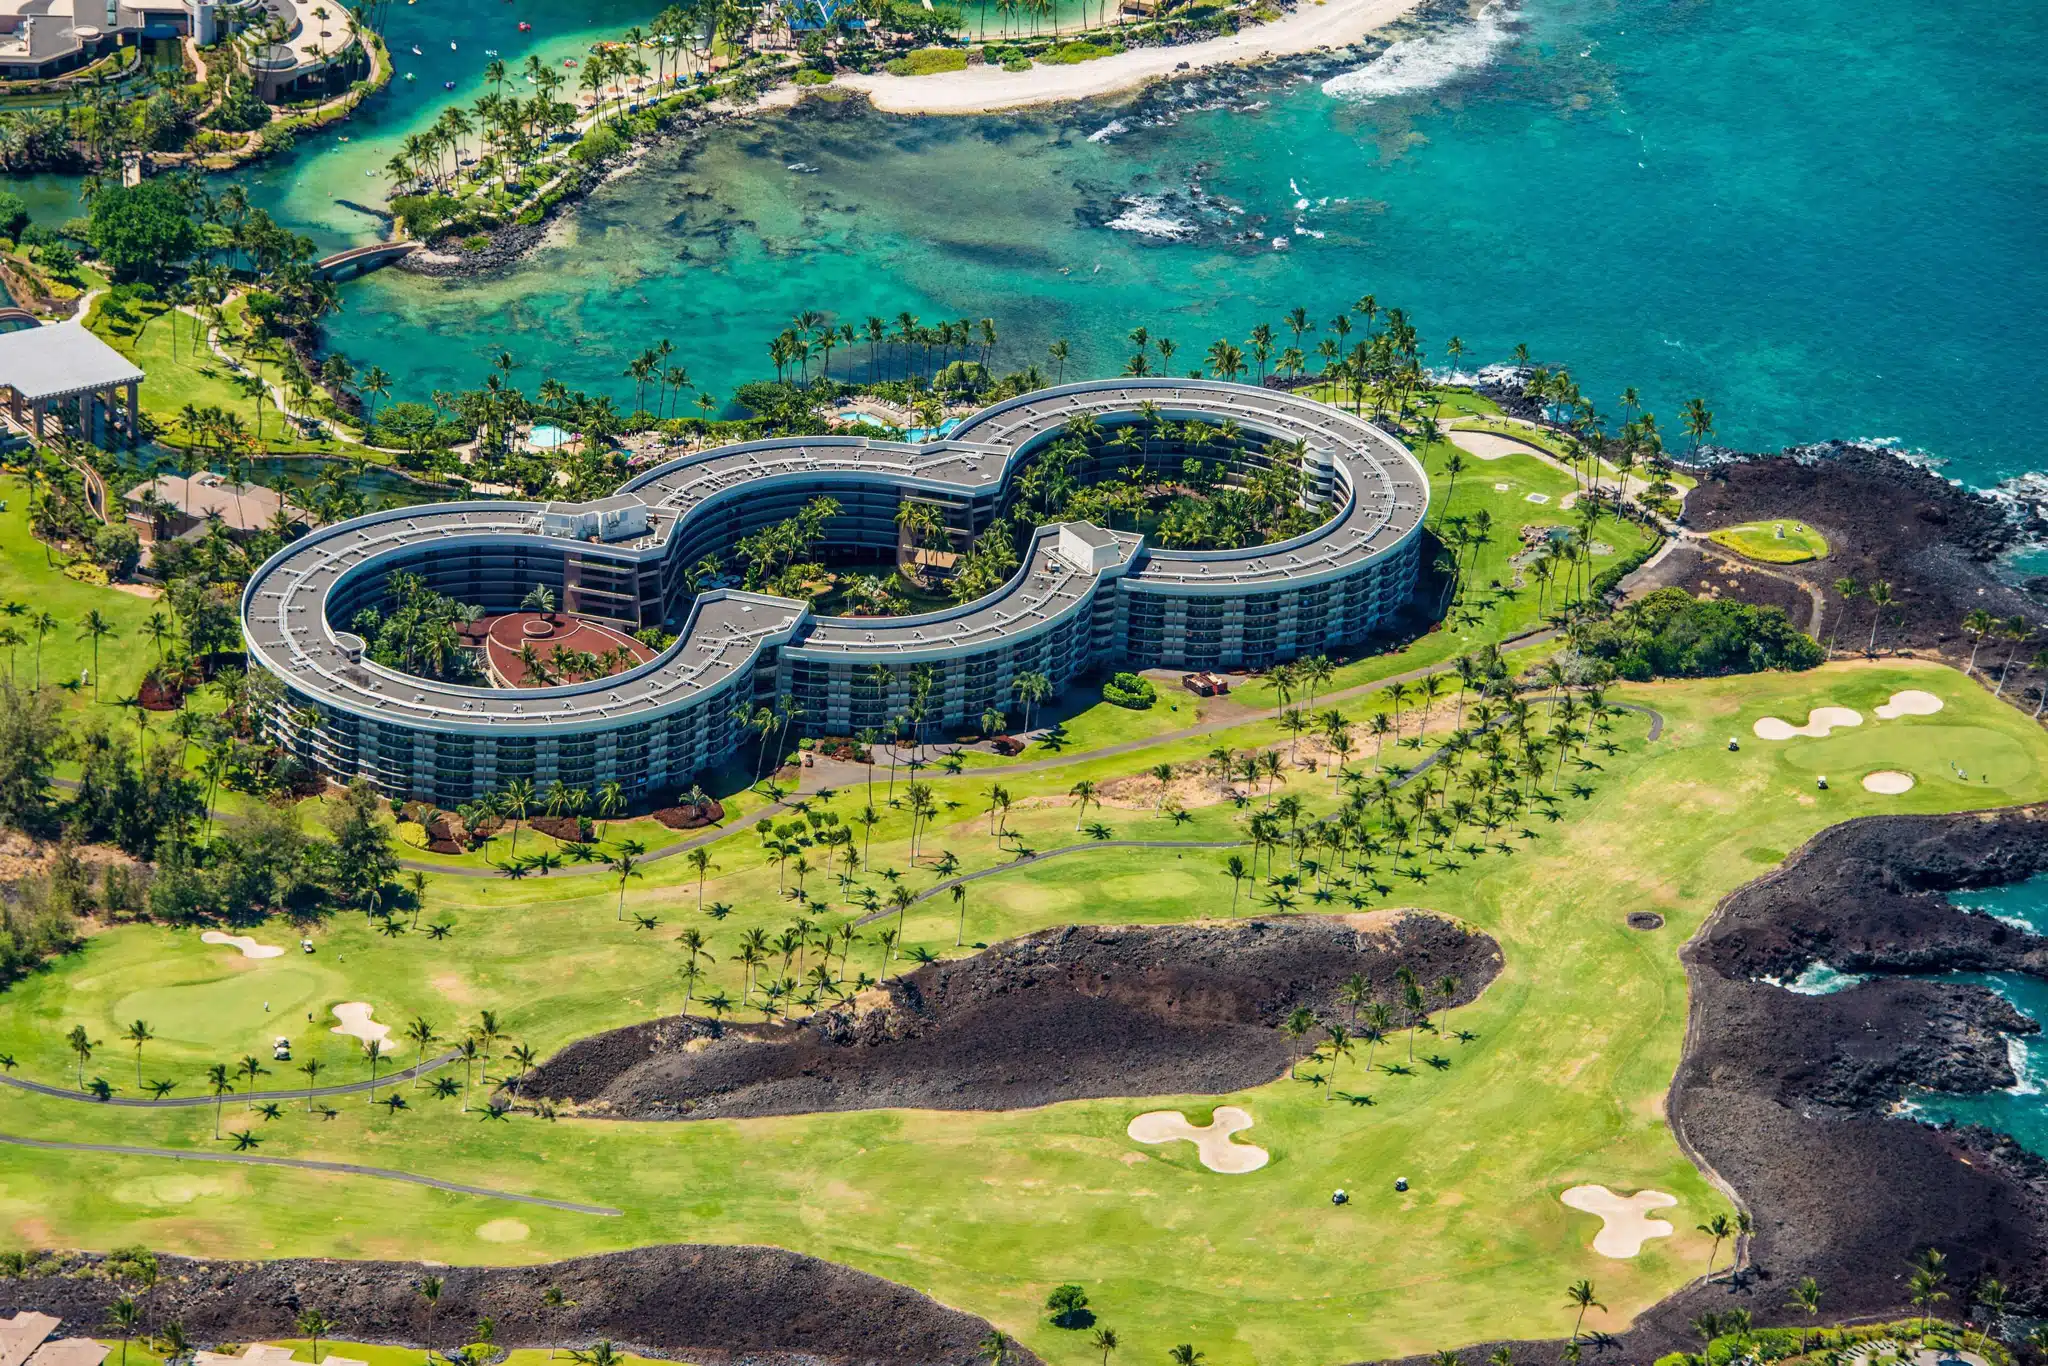 Ocean Tower by Hilton Grand Vacations is a Hotel located in the city of Waikoloa on Big Island, Hawaii